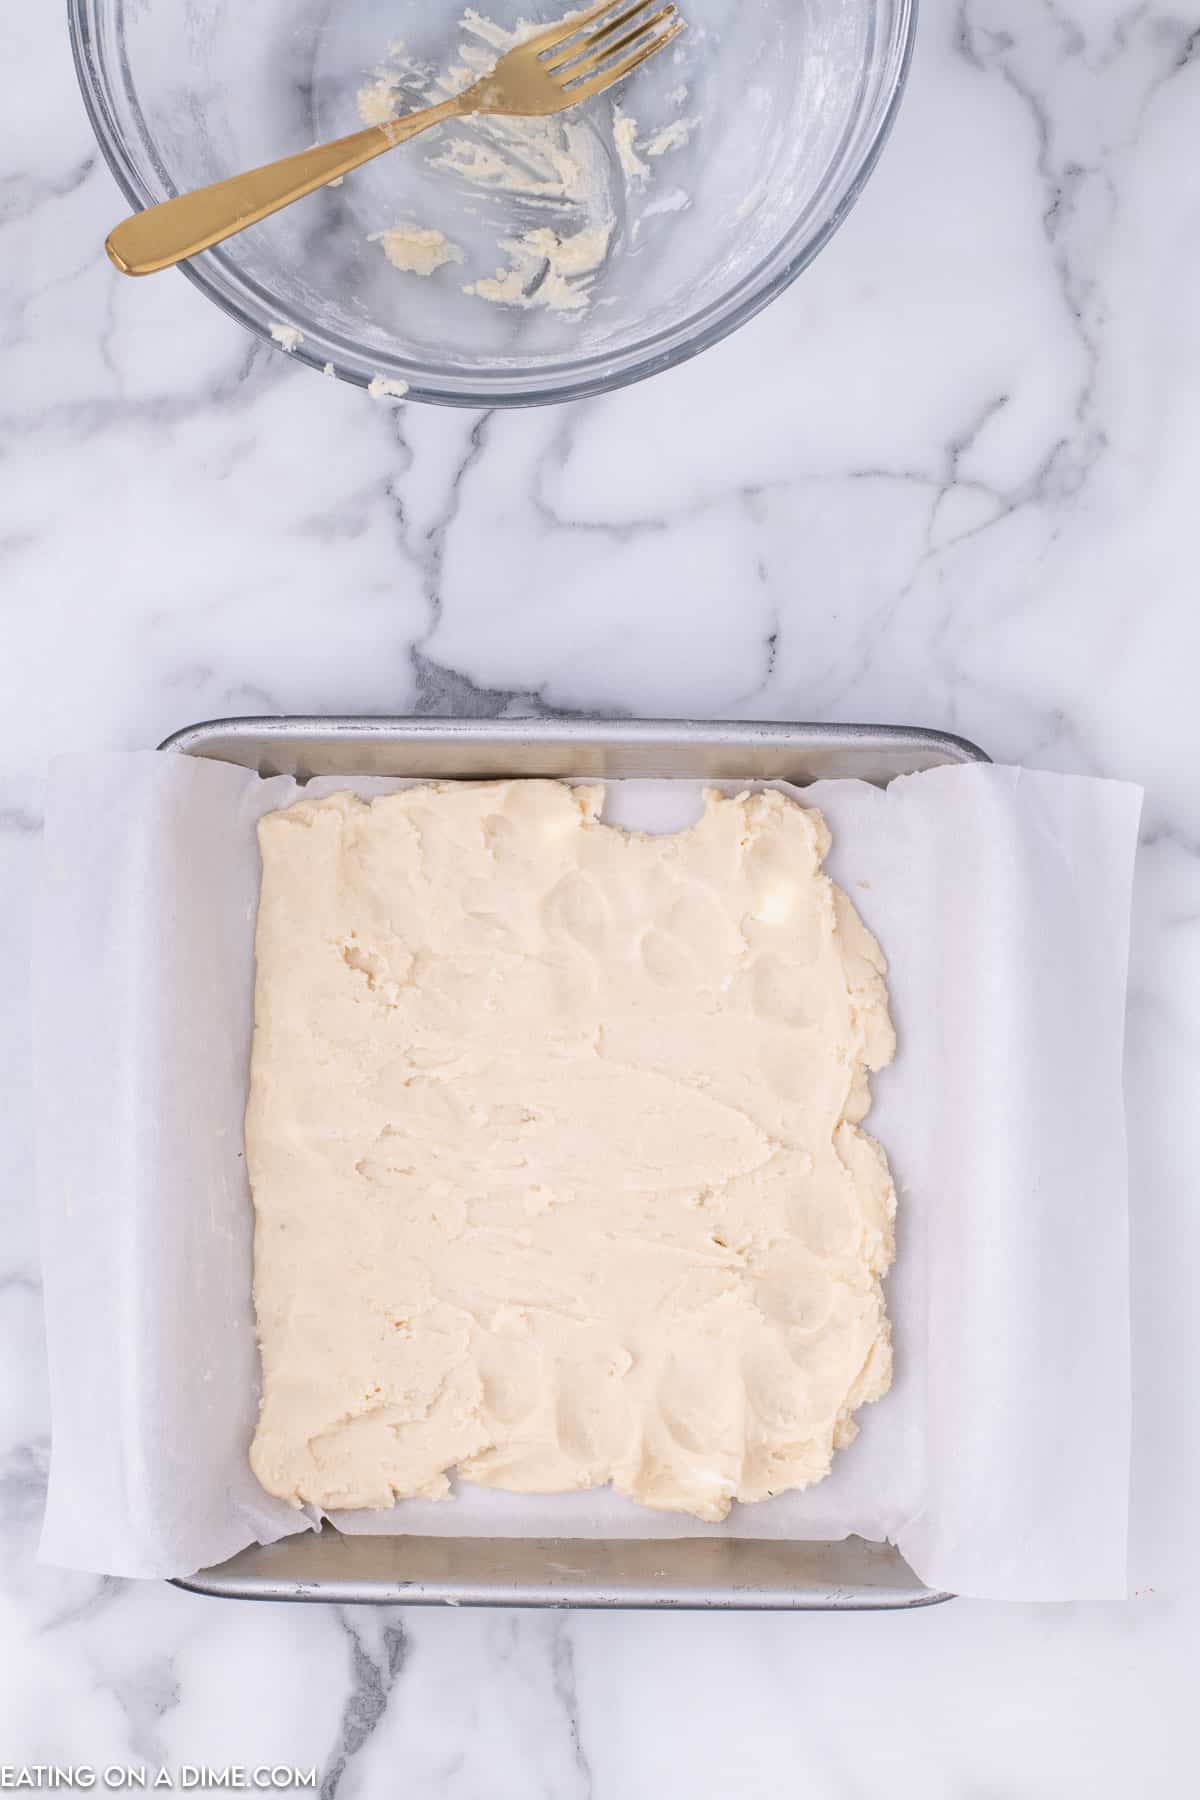 Shortbread dough pressed in a baking dish lined with parchment paper